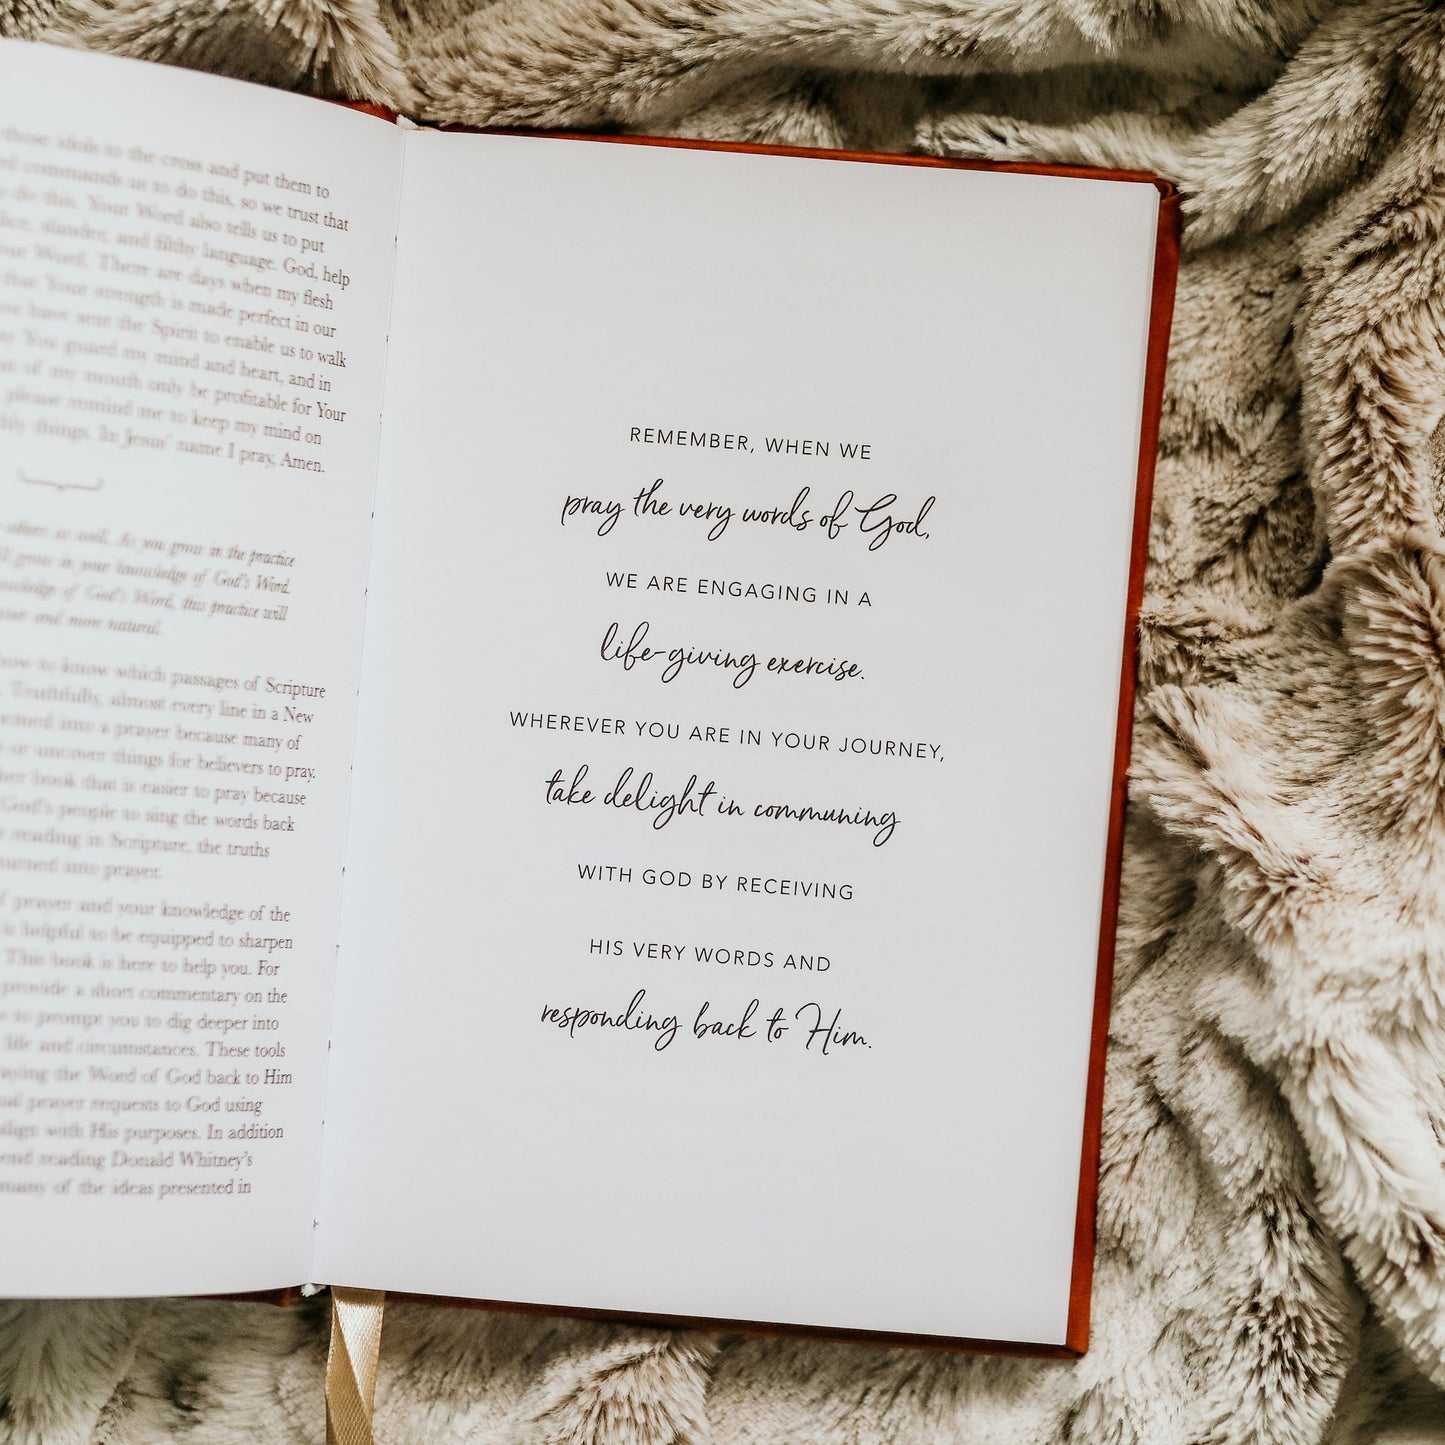 Praying Scripture for Marriage Journal-The Daily Grace Co.